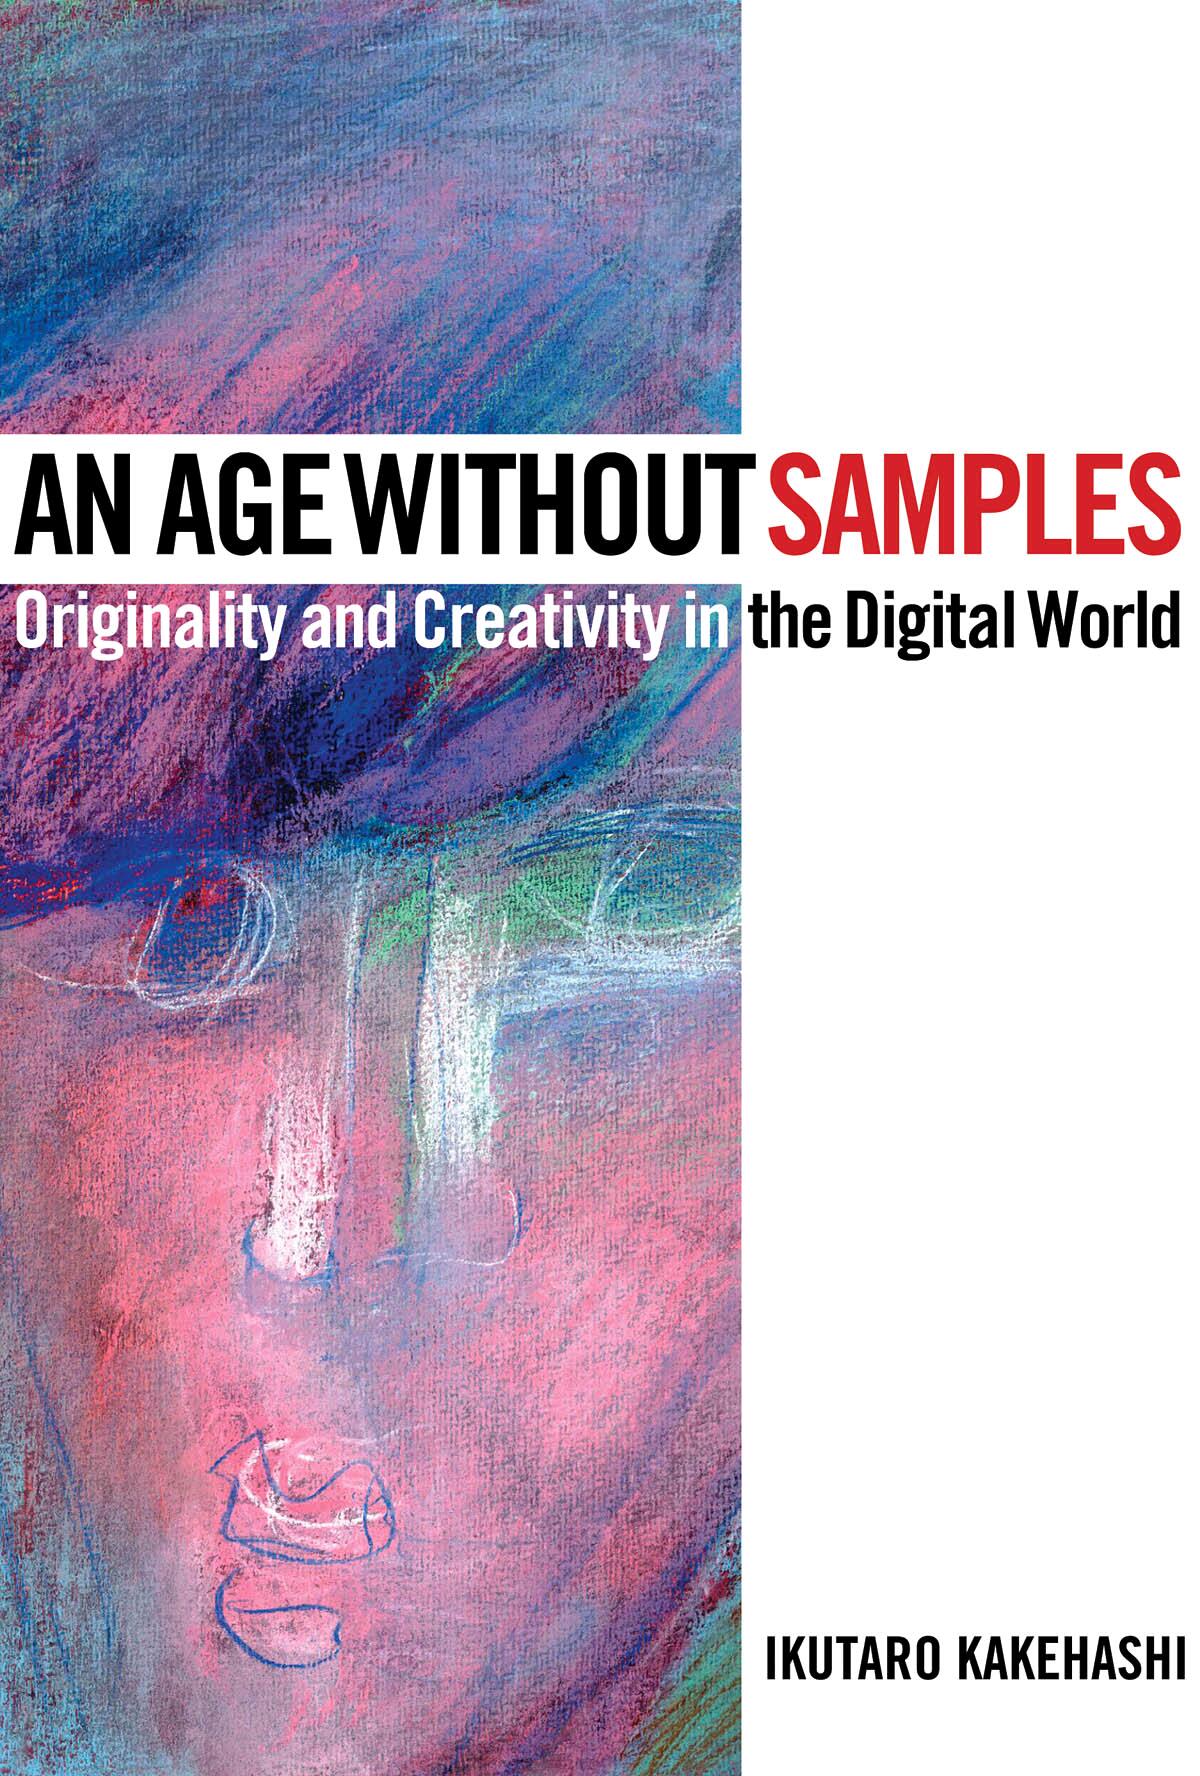 An Age Without Samples - Originality and Creativity in the Digital World : photo 1